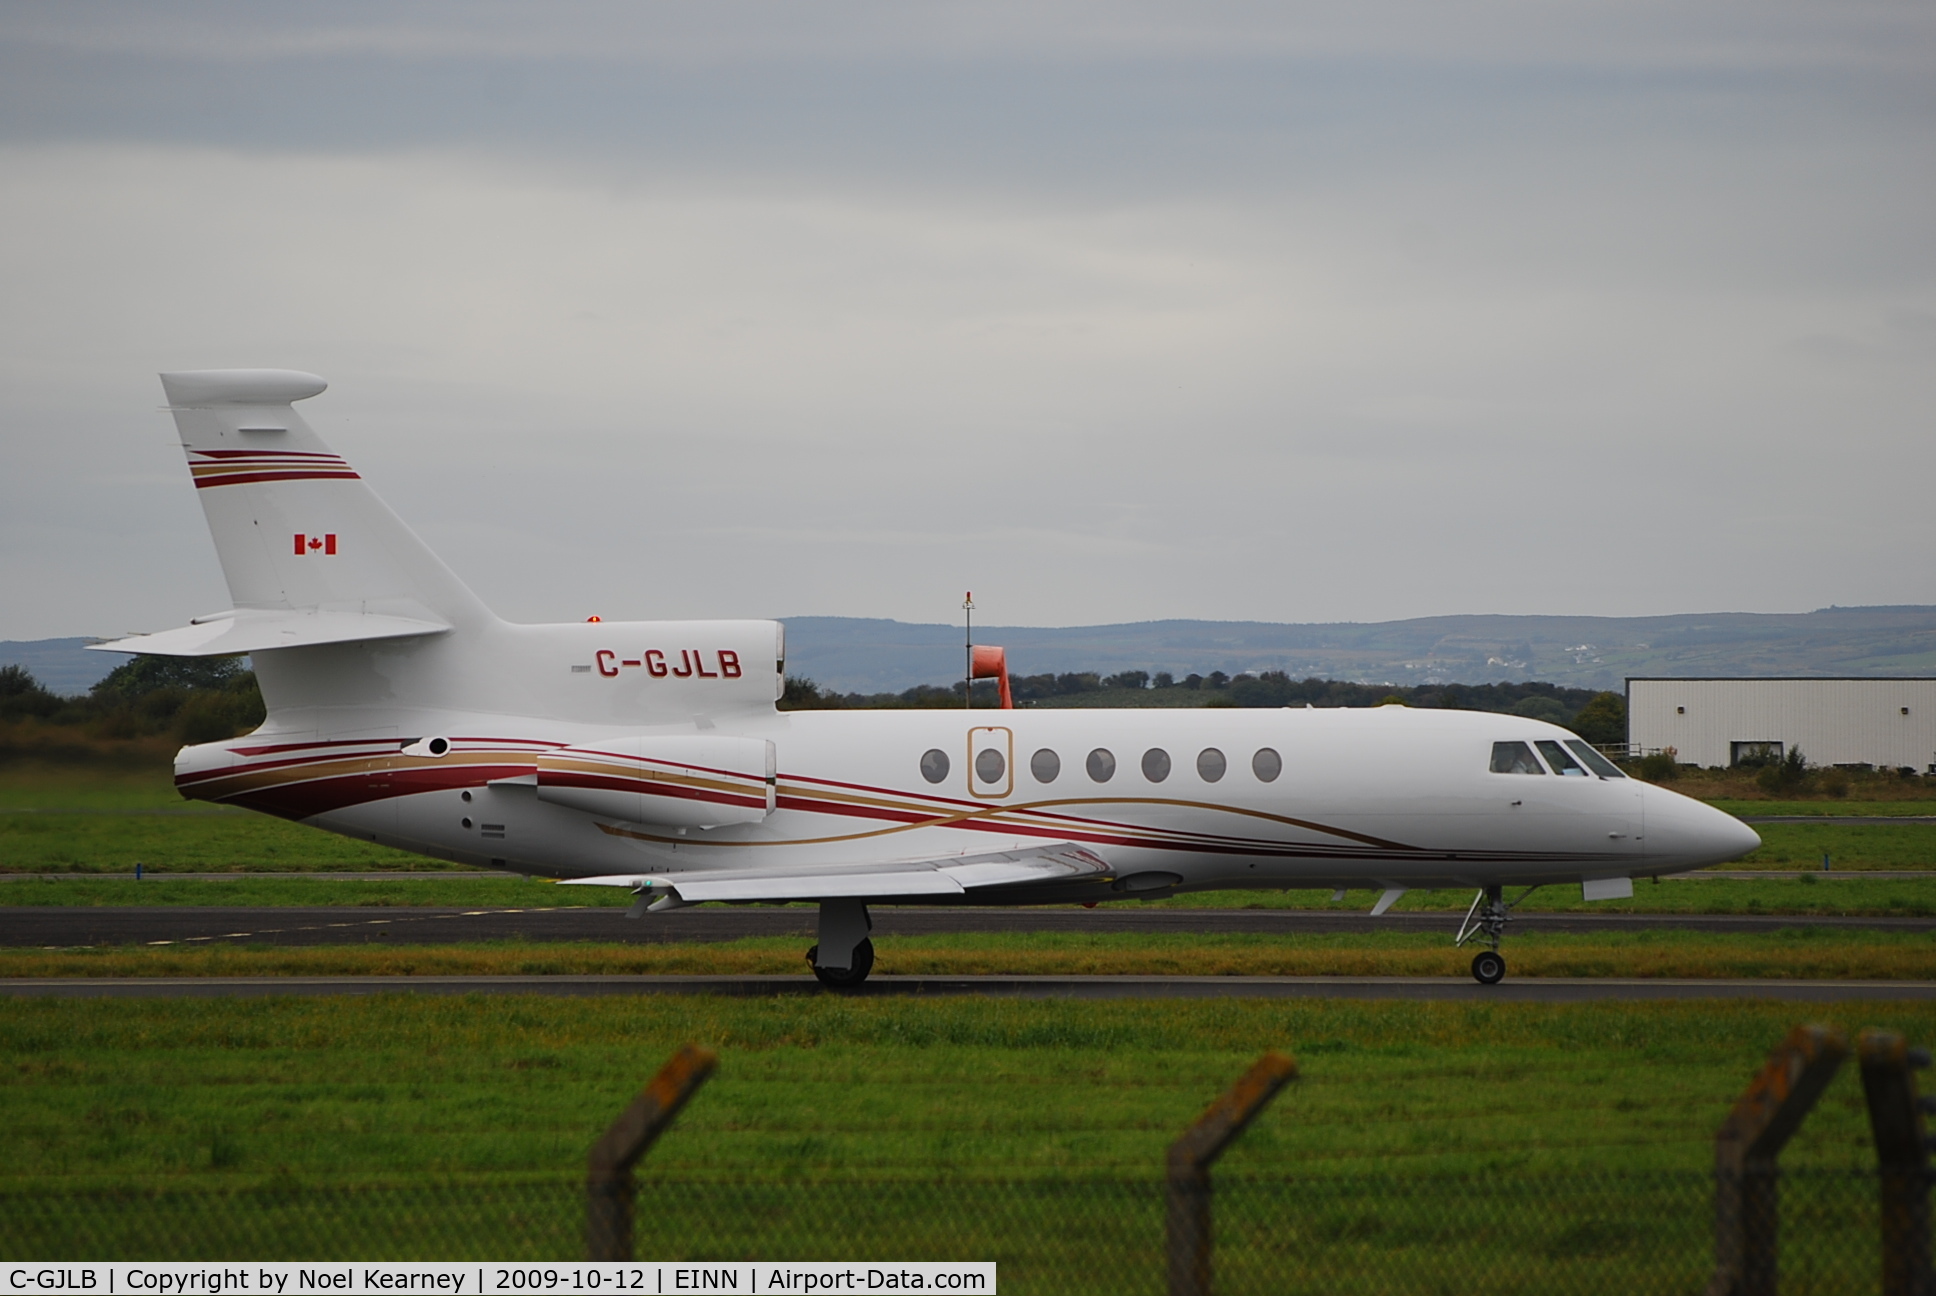 C-GJLB, 1998 Dassault Falcon 50EX C/N 270, Taxi-ing out for departure from Rwy 24